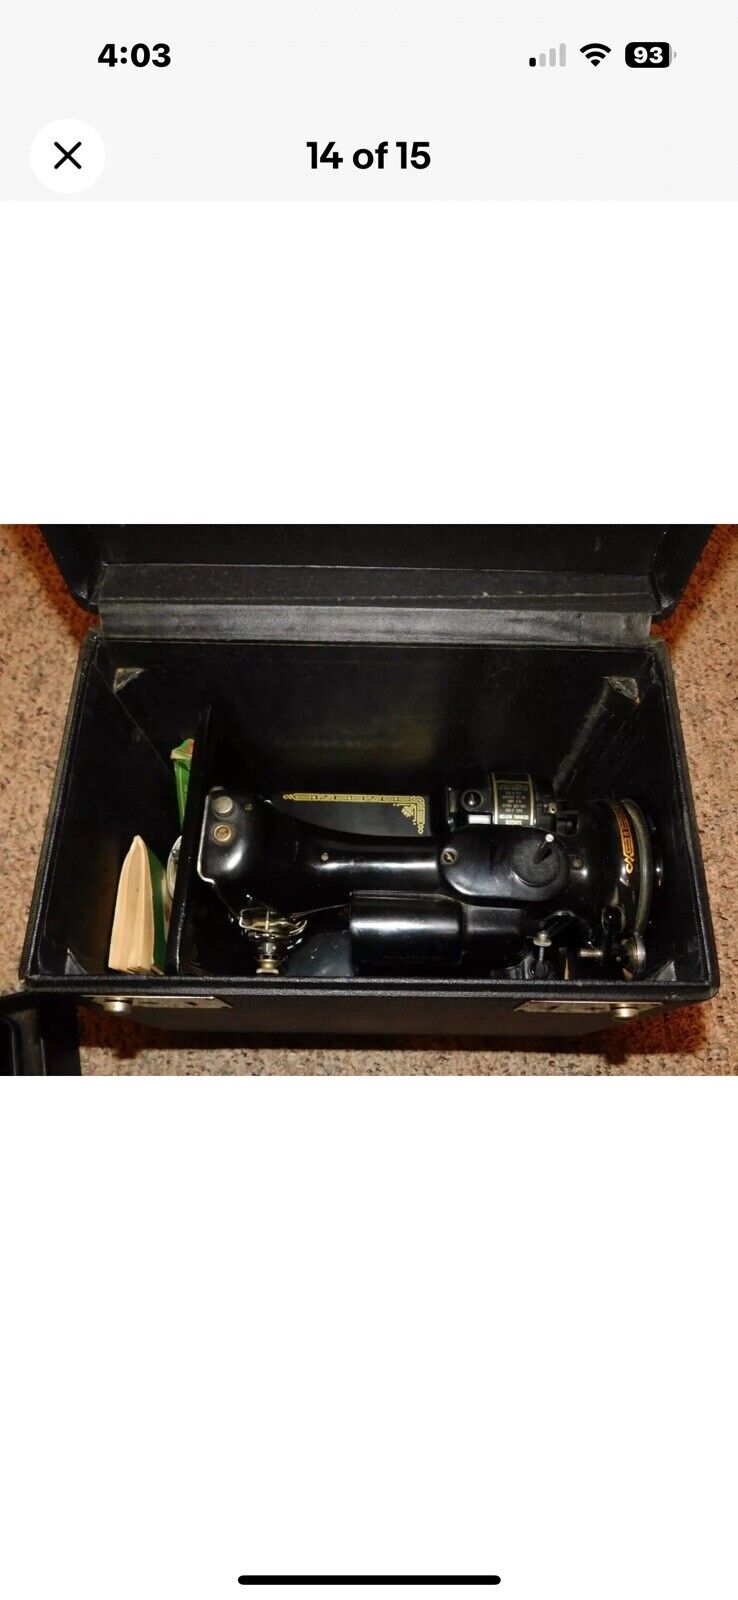 1947 Singer Featherweight 221-1 Series Sewing Machine Vintage With Case & Peddle